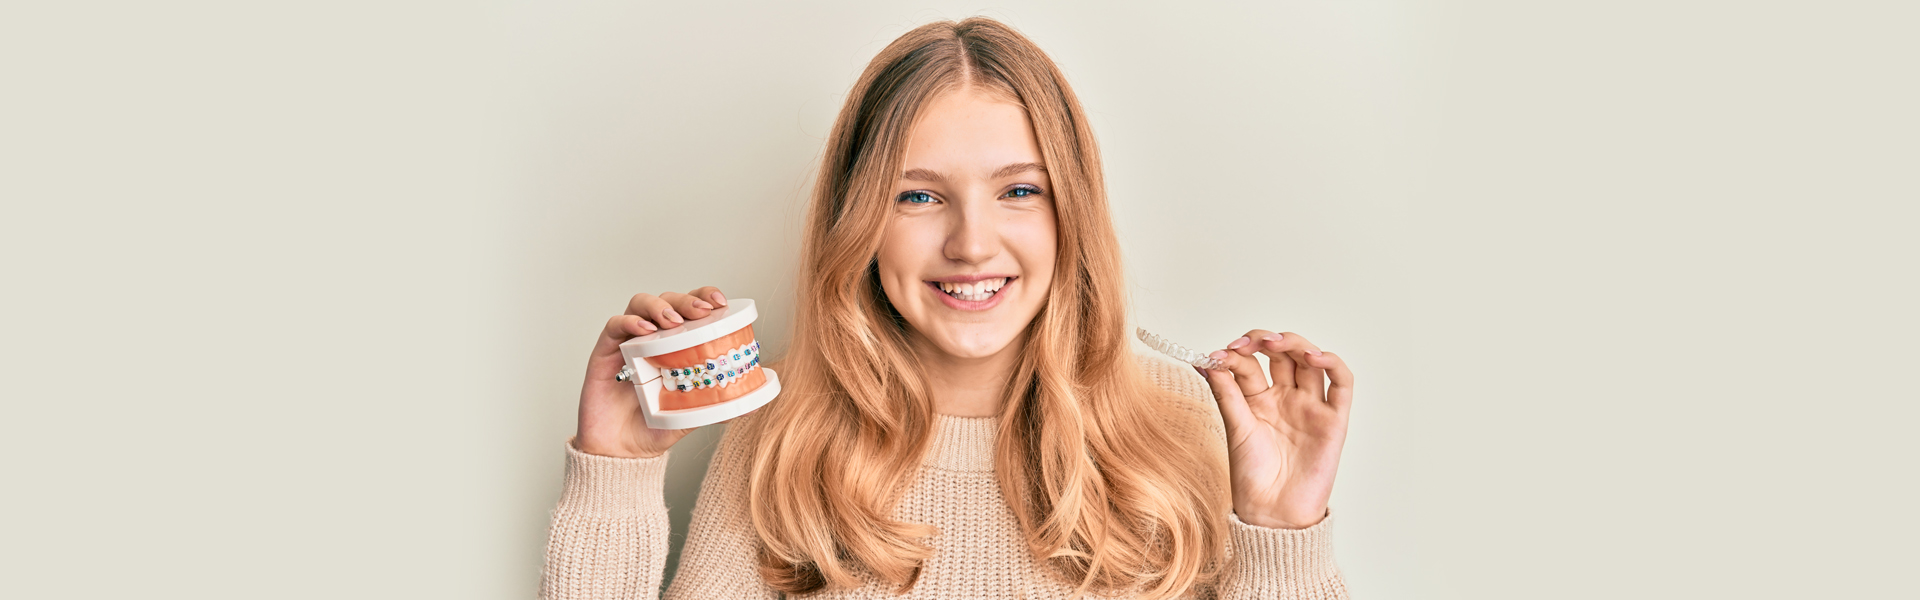 How Much Time Does Invisalign Braces Take To Straighten Teeth?